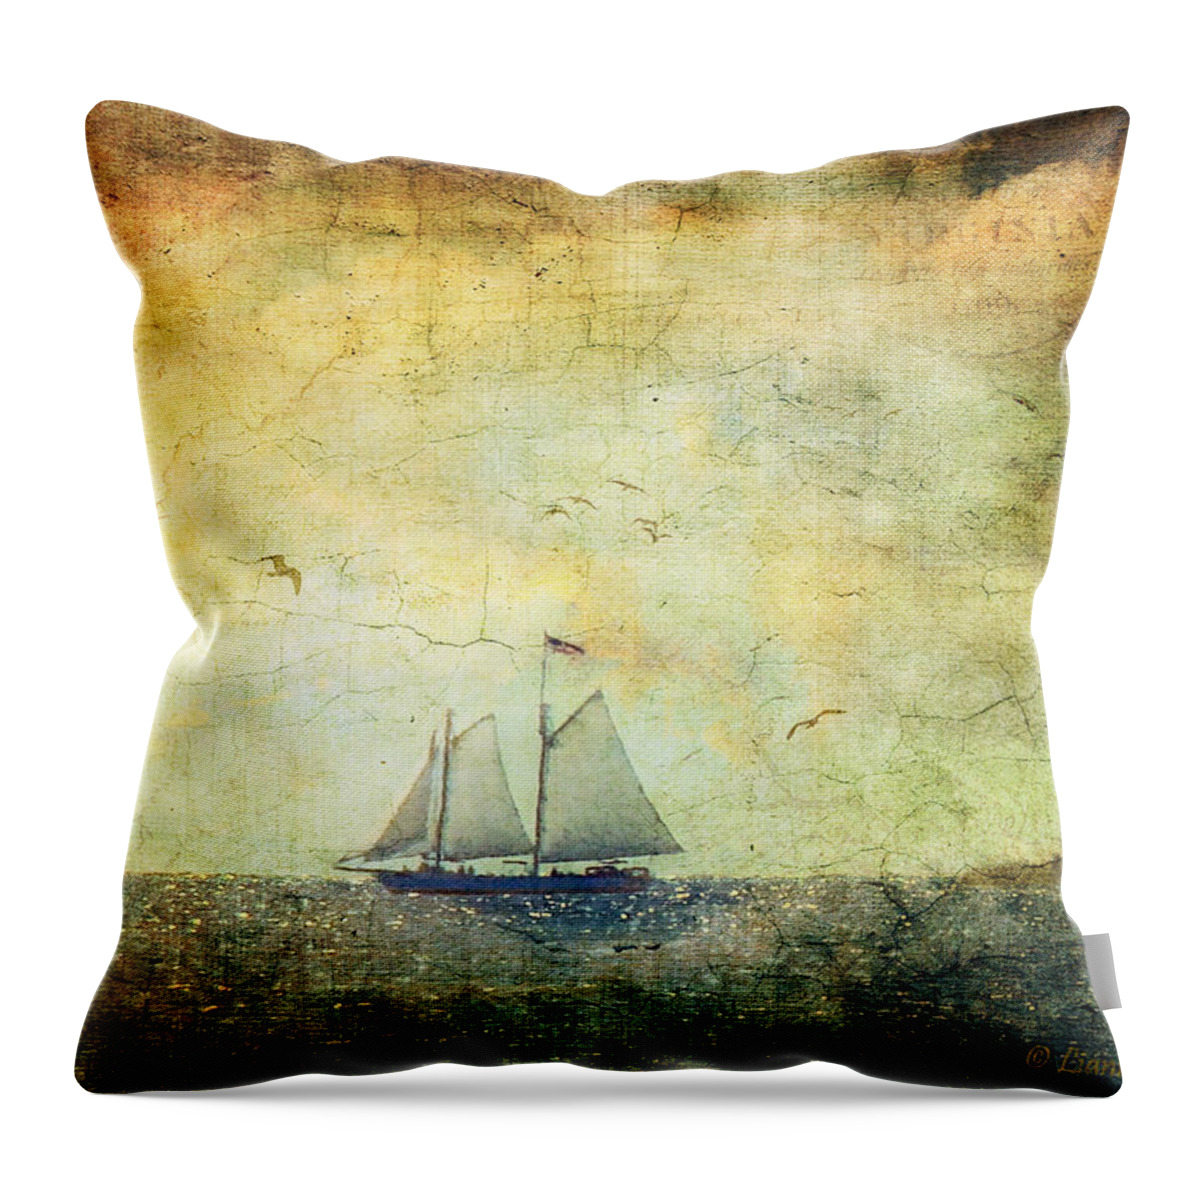 Sailing Throw Pillow featuring the photograph We Shall Not Cease by Lianne Schneider